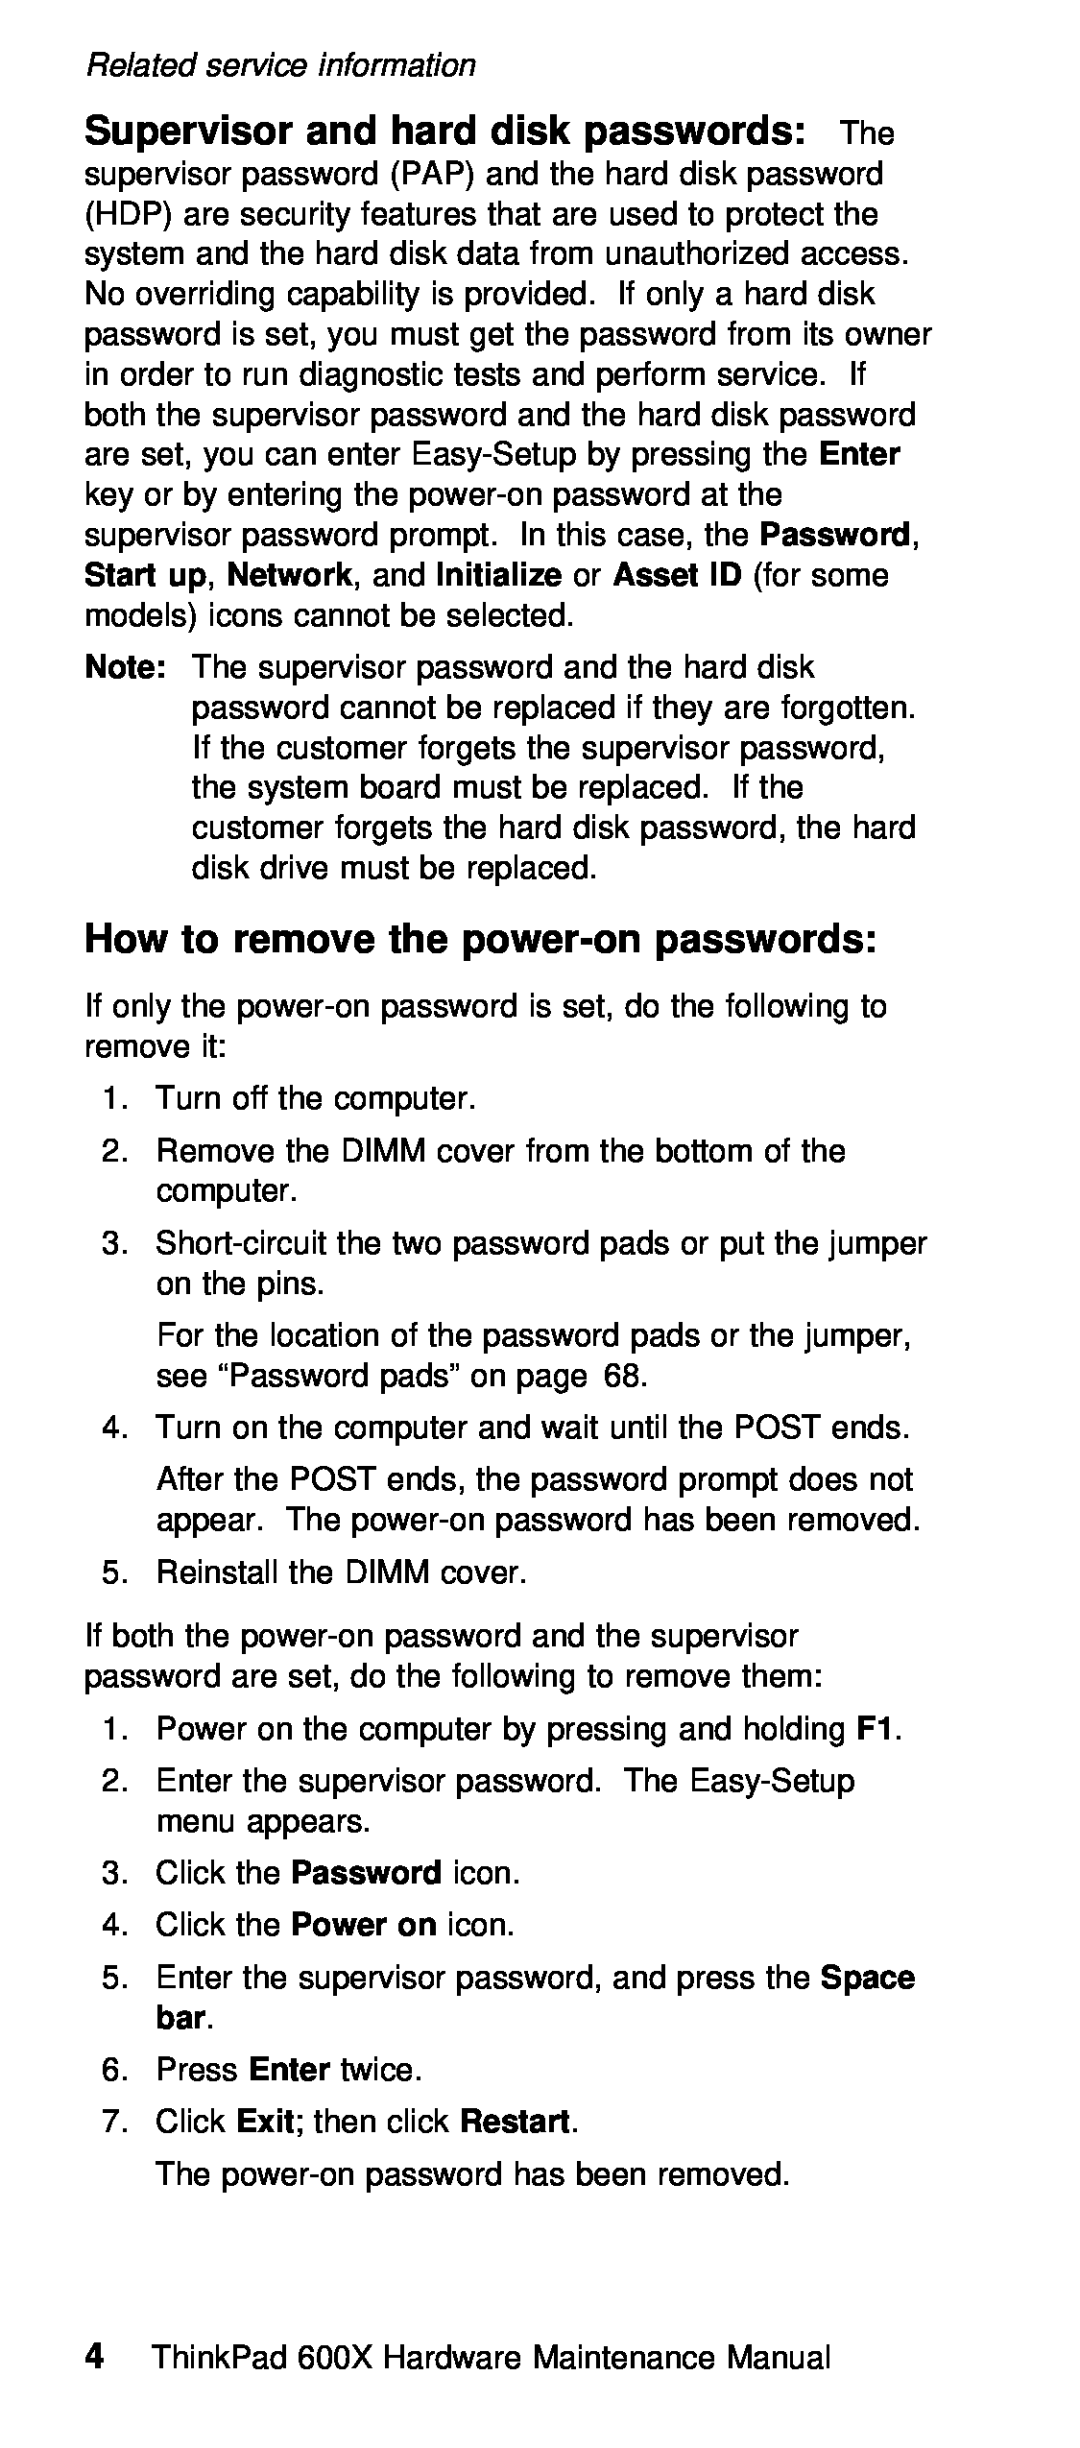 IBM 600X (MT 2646) manual How to remove the power-on passwords, Supervisor and hard disk passwords 